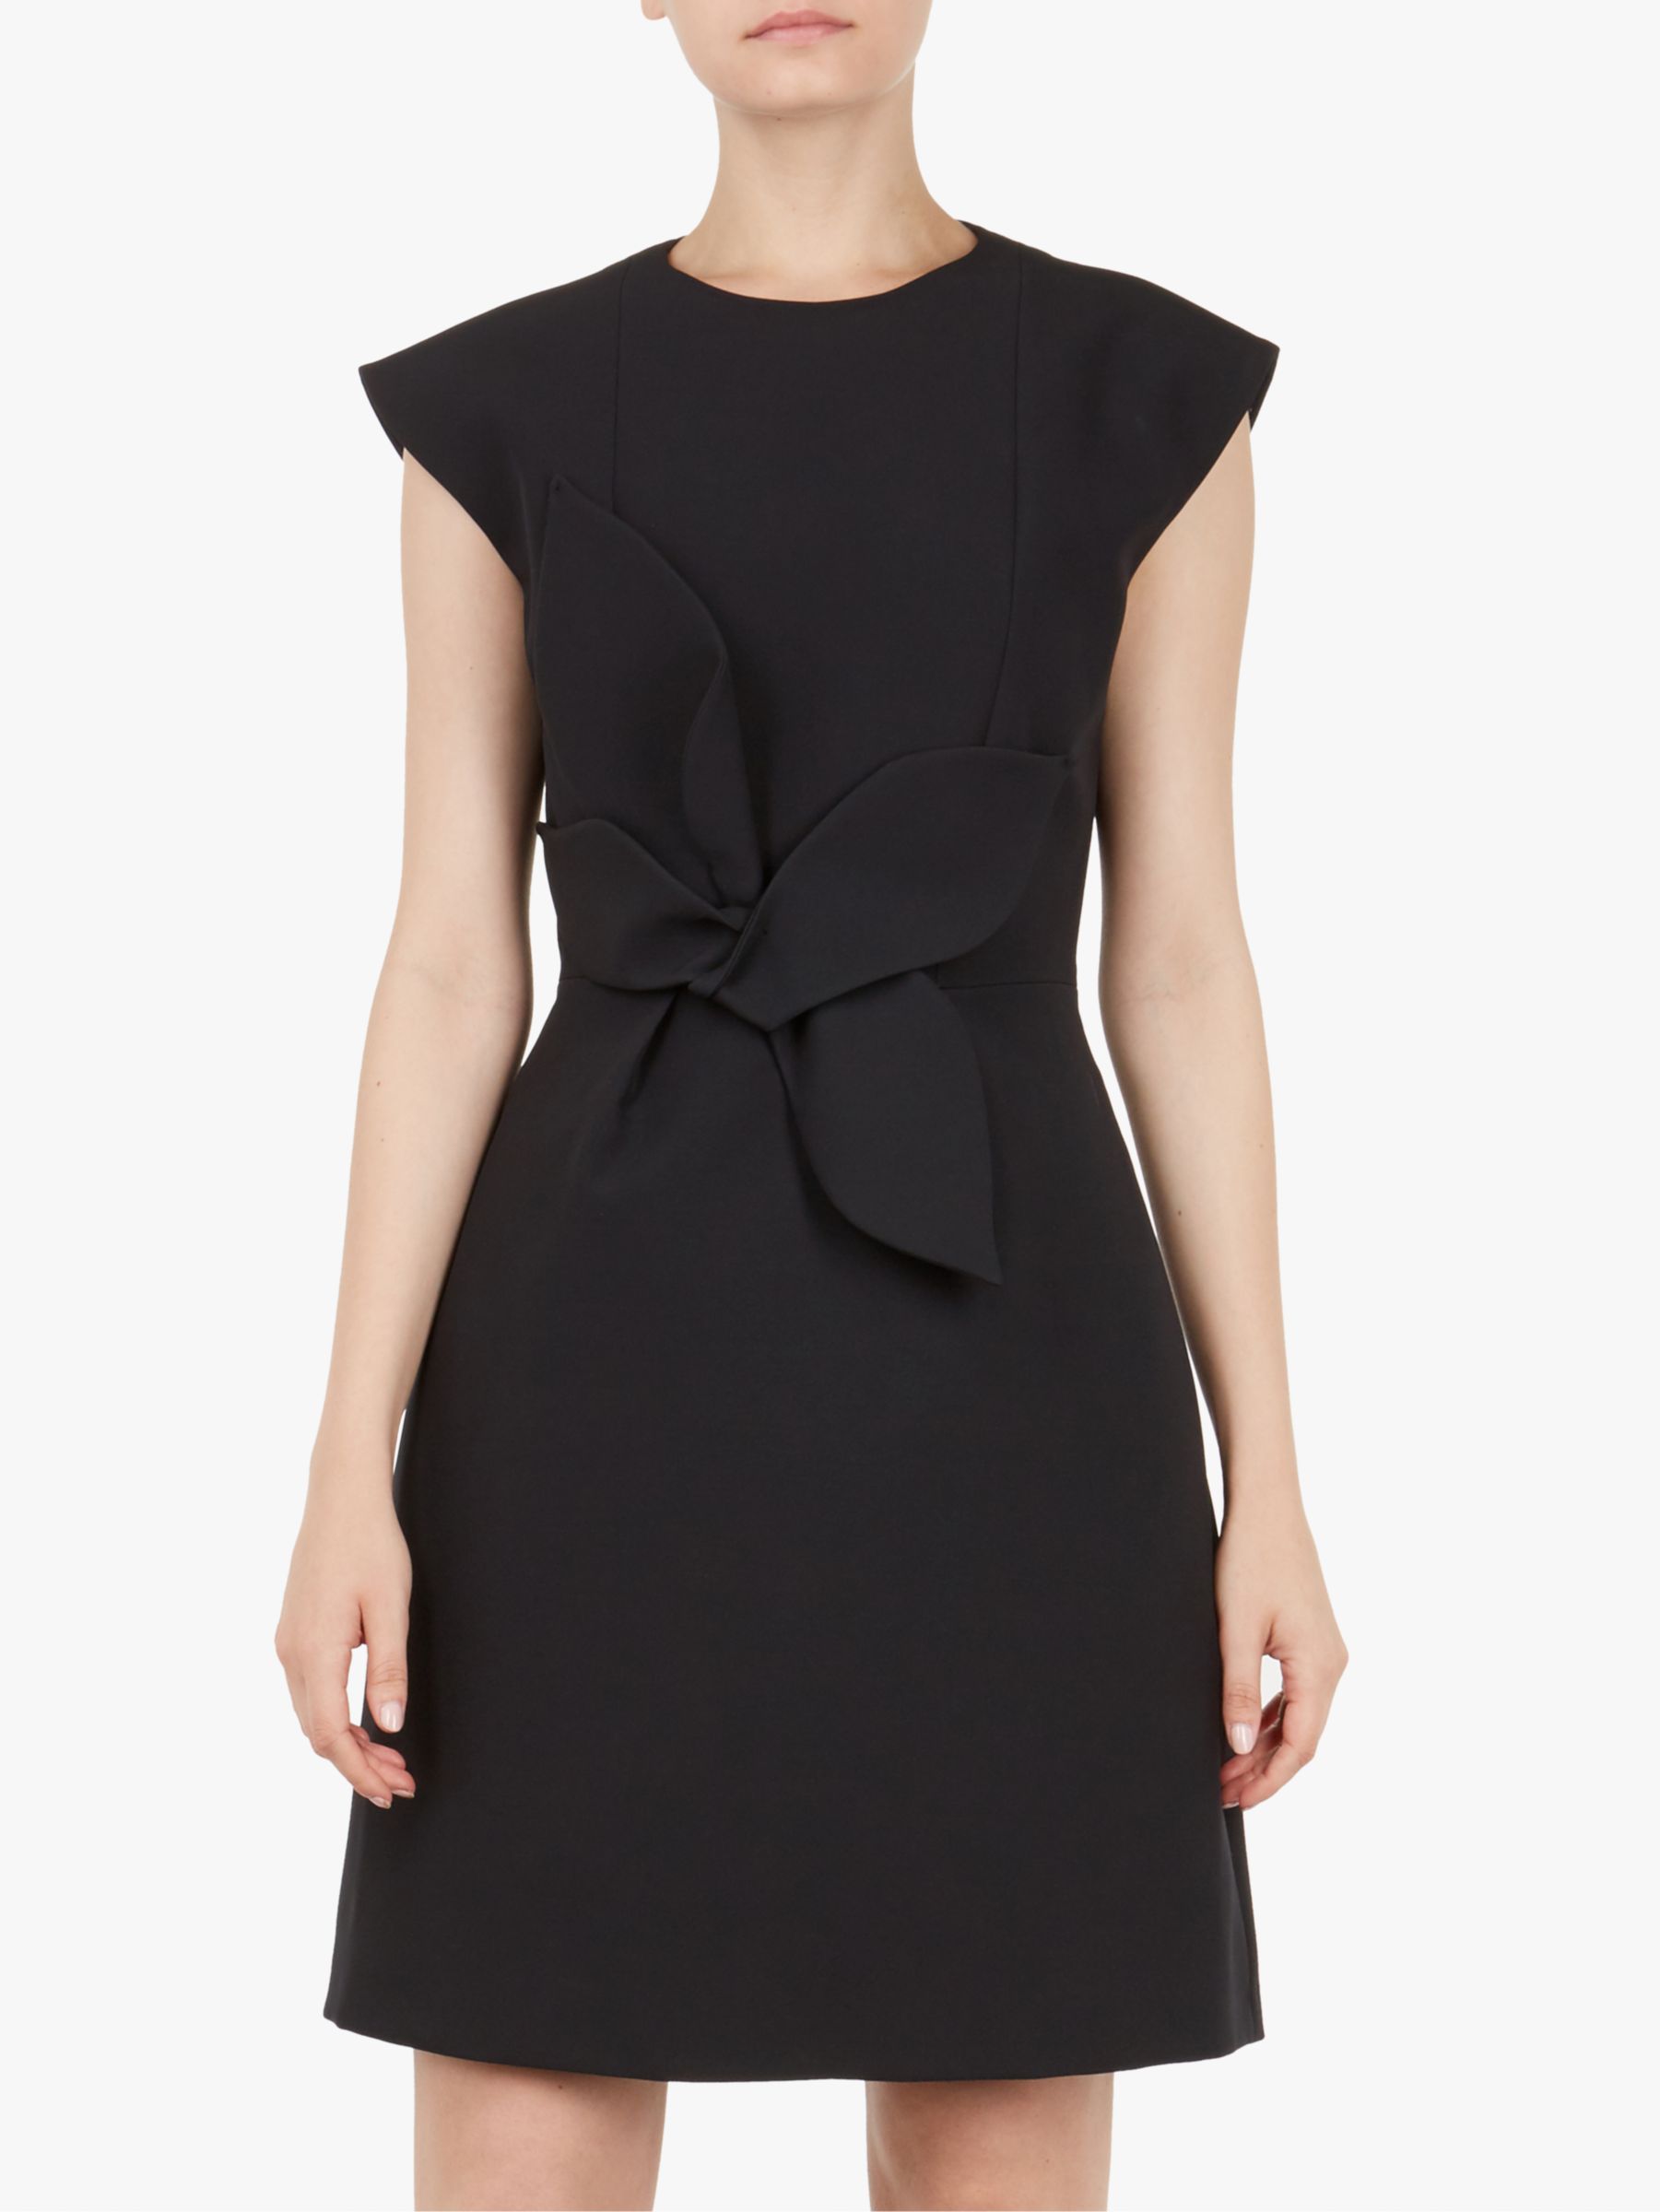 Ted Baker Cap Sleeved Structured Bow Dress, Black at John Lewis & Partners